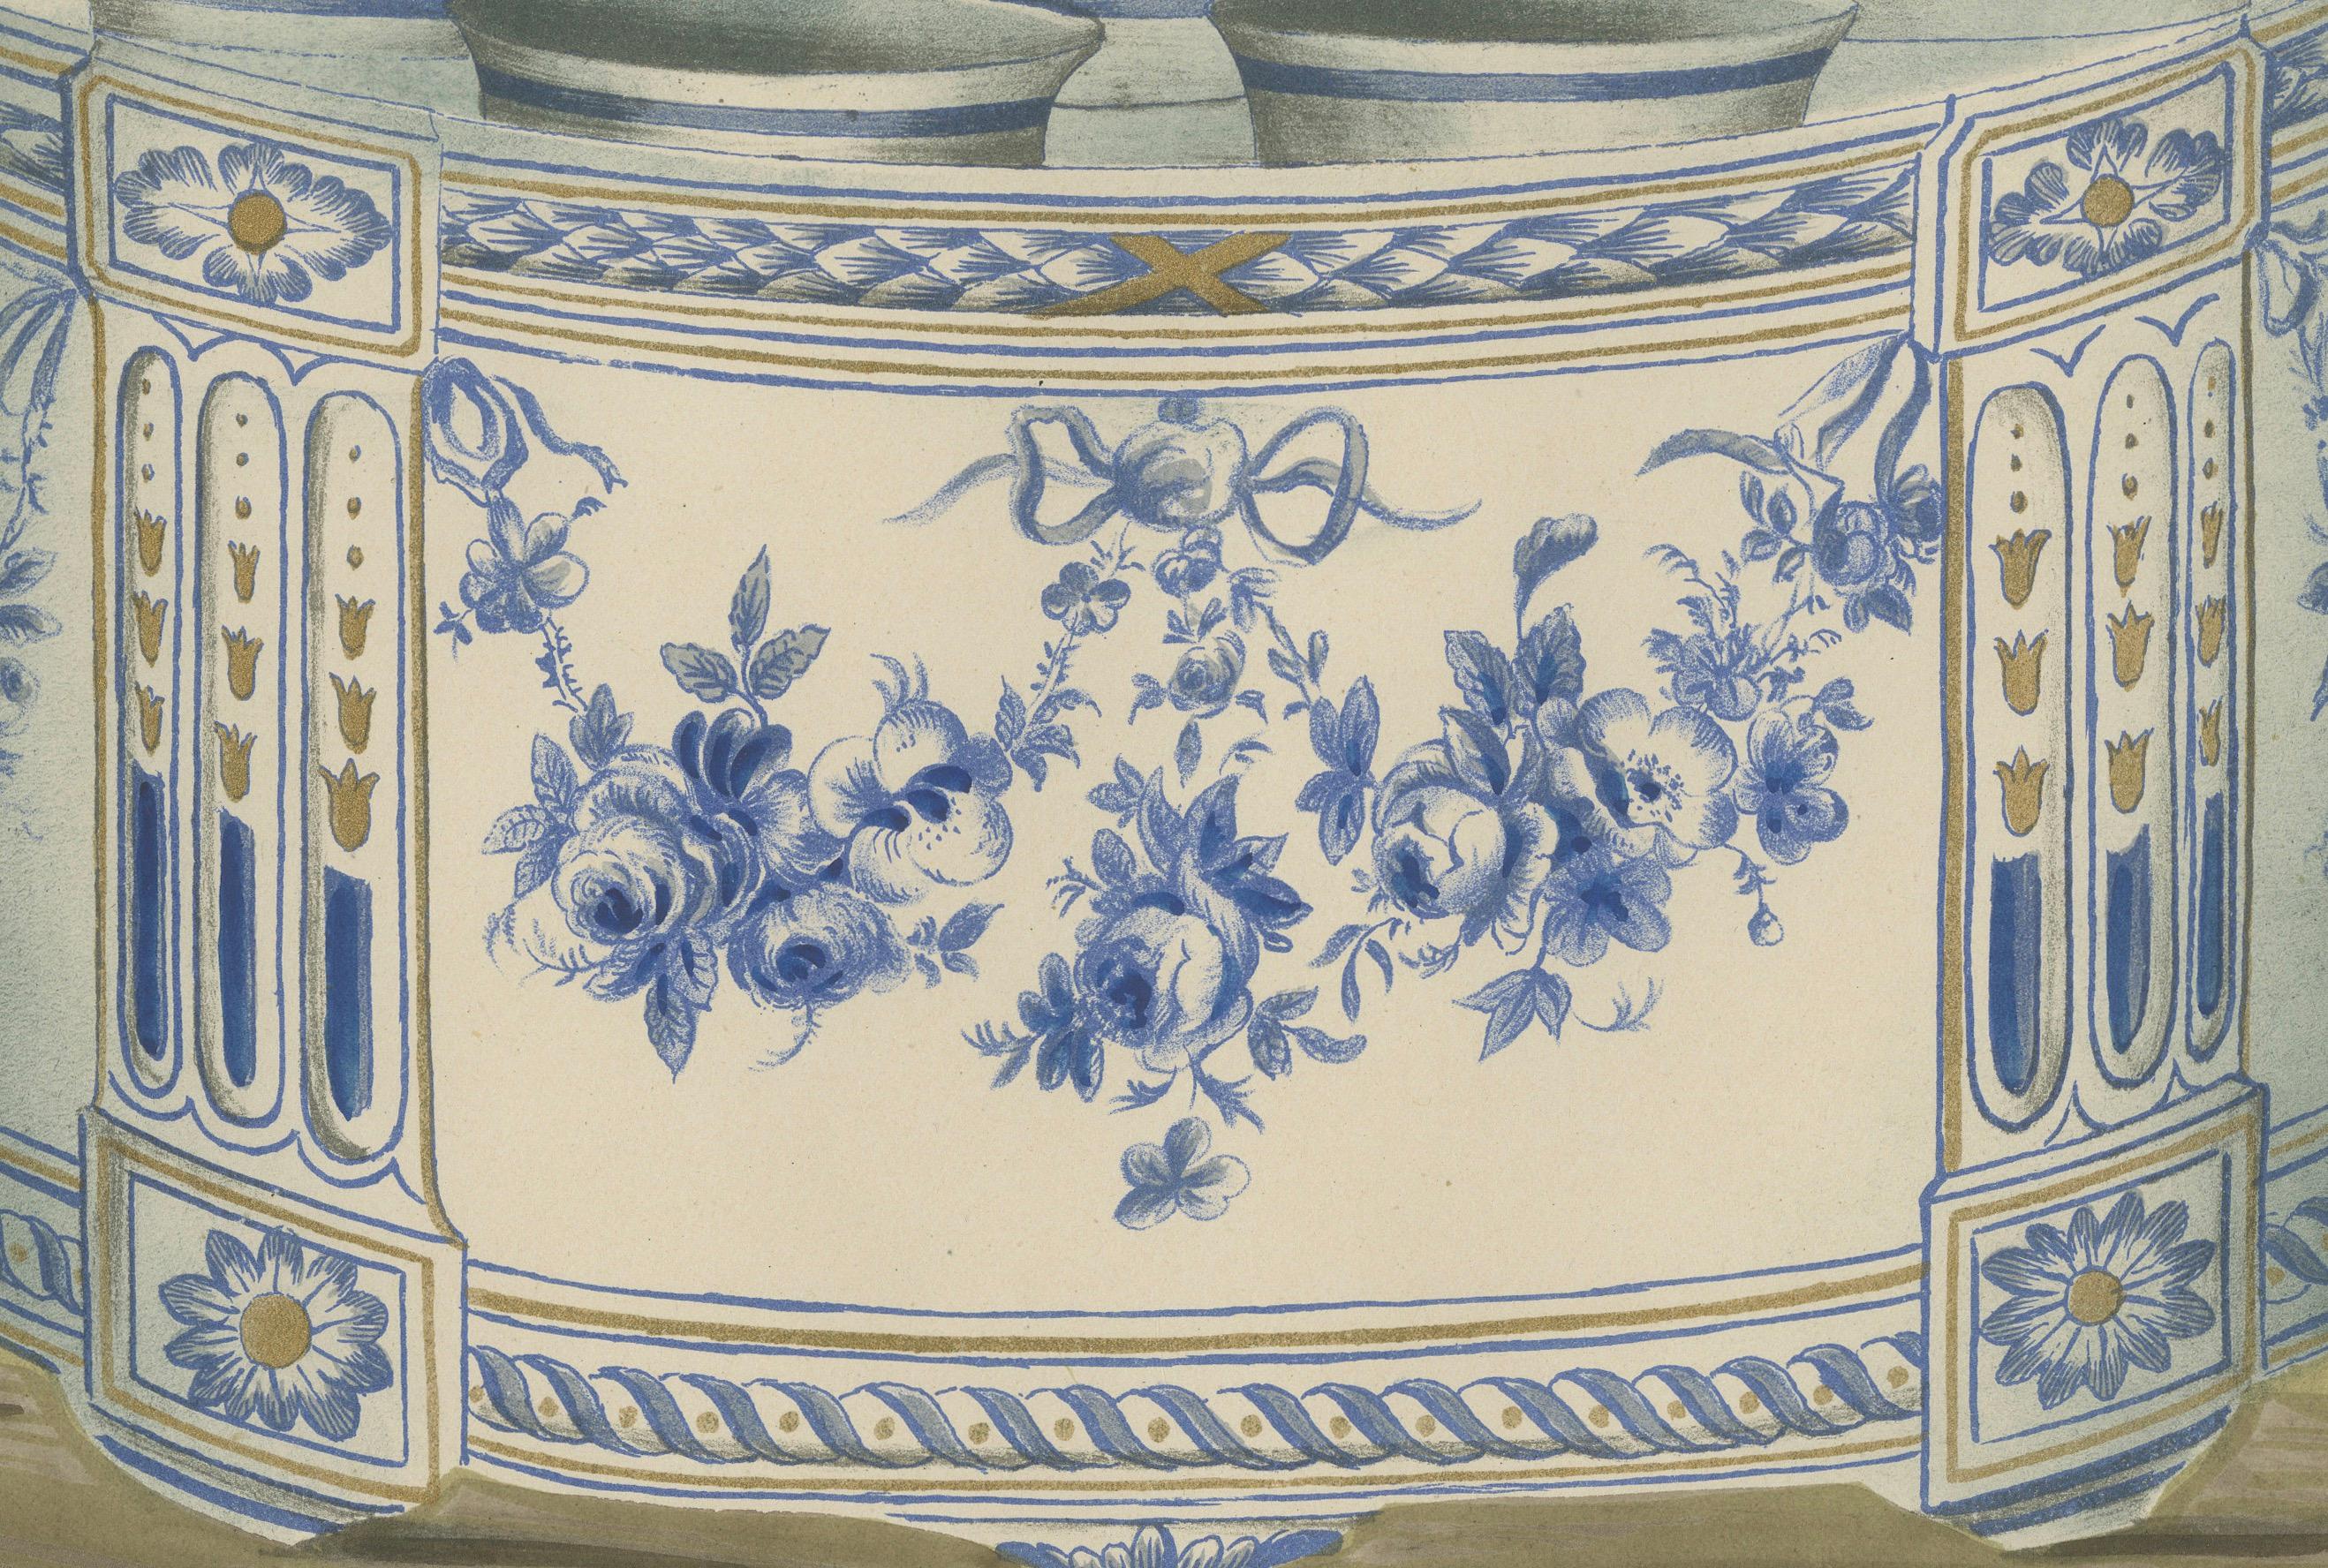 Paper Timeless Elegance: Sceaux Jardinière- A Tribute to French Ceramic Artistry, 1874 For Sale